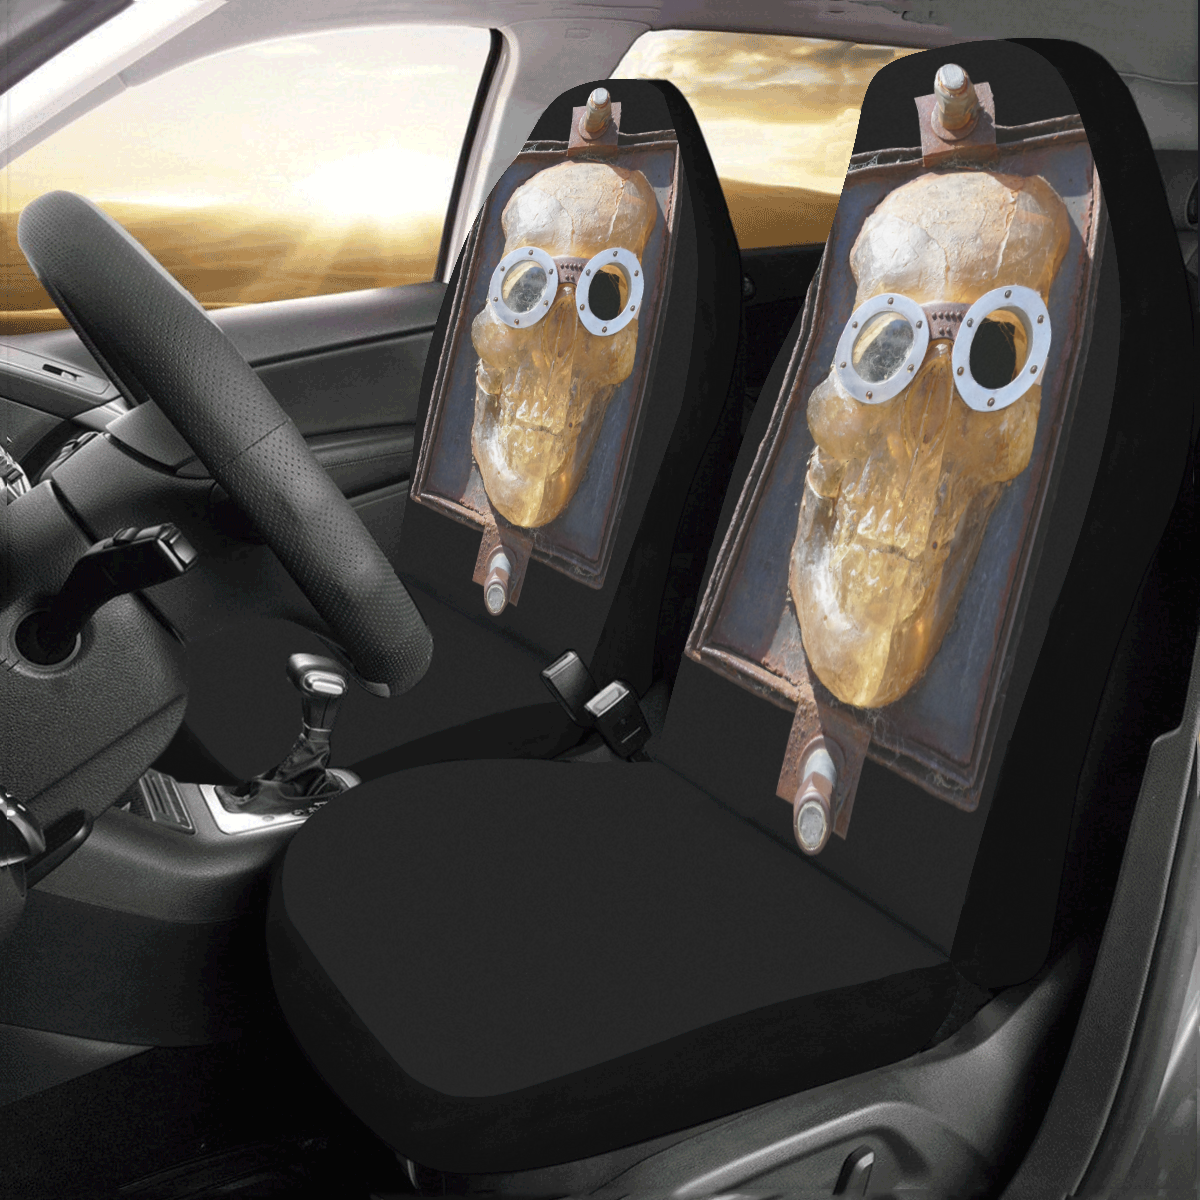 Steampunk Skull Photo Car Seat Covers (Set of 2)